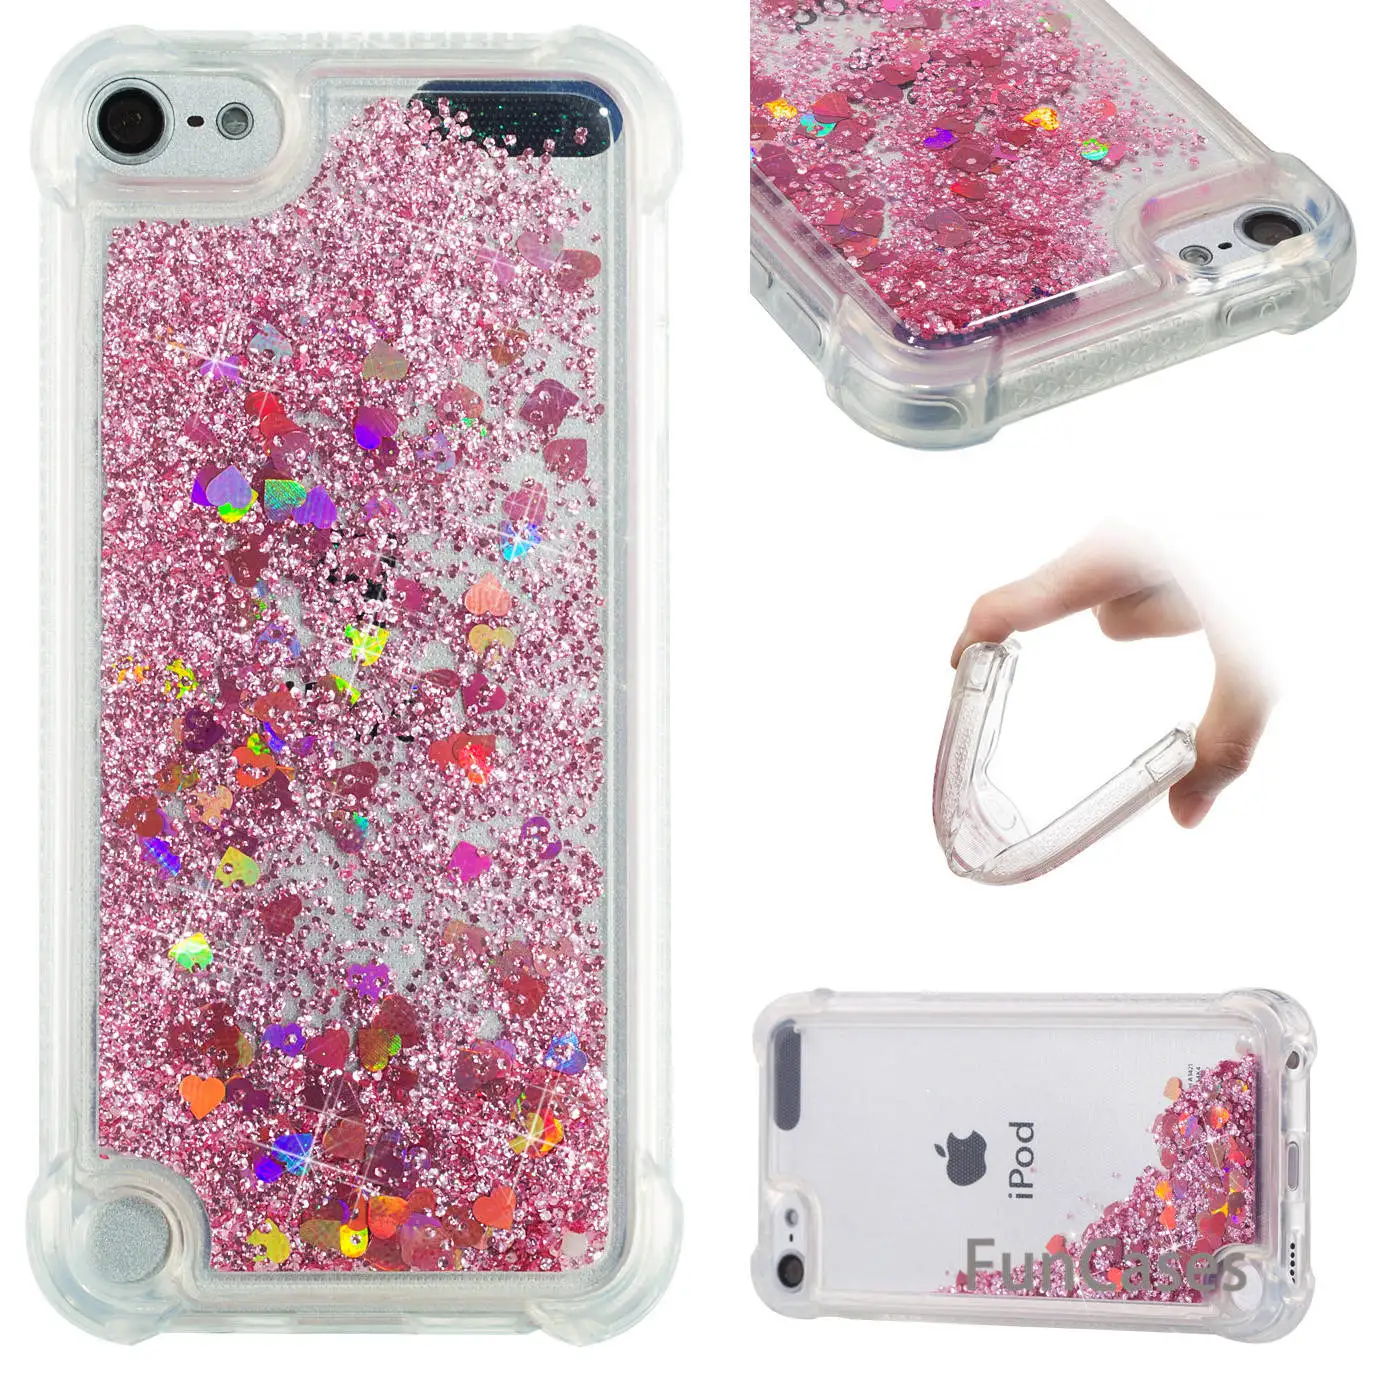 op tijd Afgekeurd Sijpelen Pink Star Case sFor Hoesje iPhone Touch 5 Soft Silicone Back Cover Carcasa  Jewelled Fitted Case sFor iPhone iPod Touch 6 Casca - AliExpress Cellphones  & Telecommunications